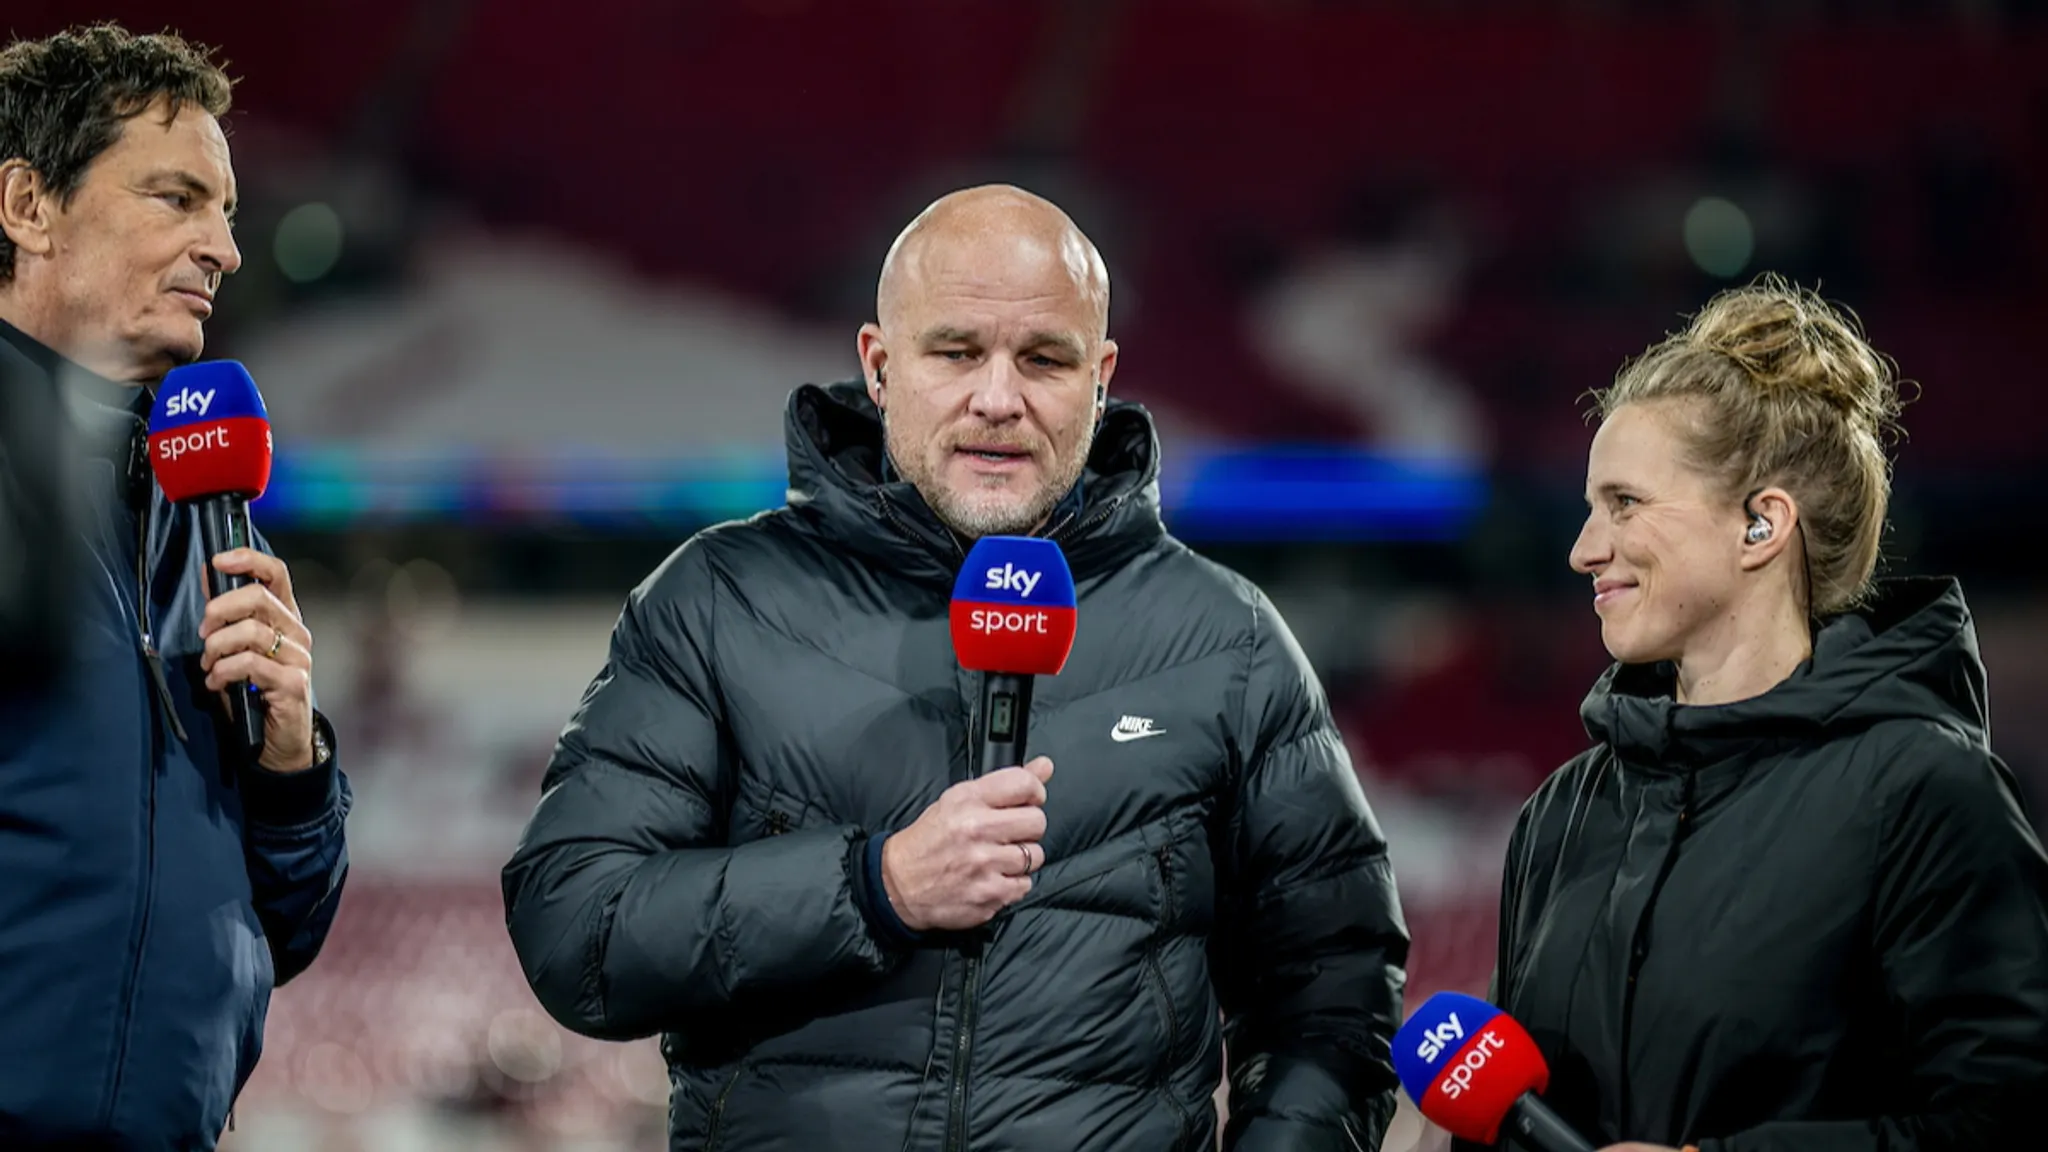 RBL sports director Rouven Schröder in an interview on Sky.